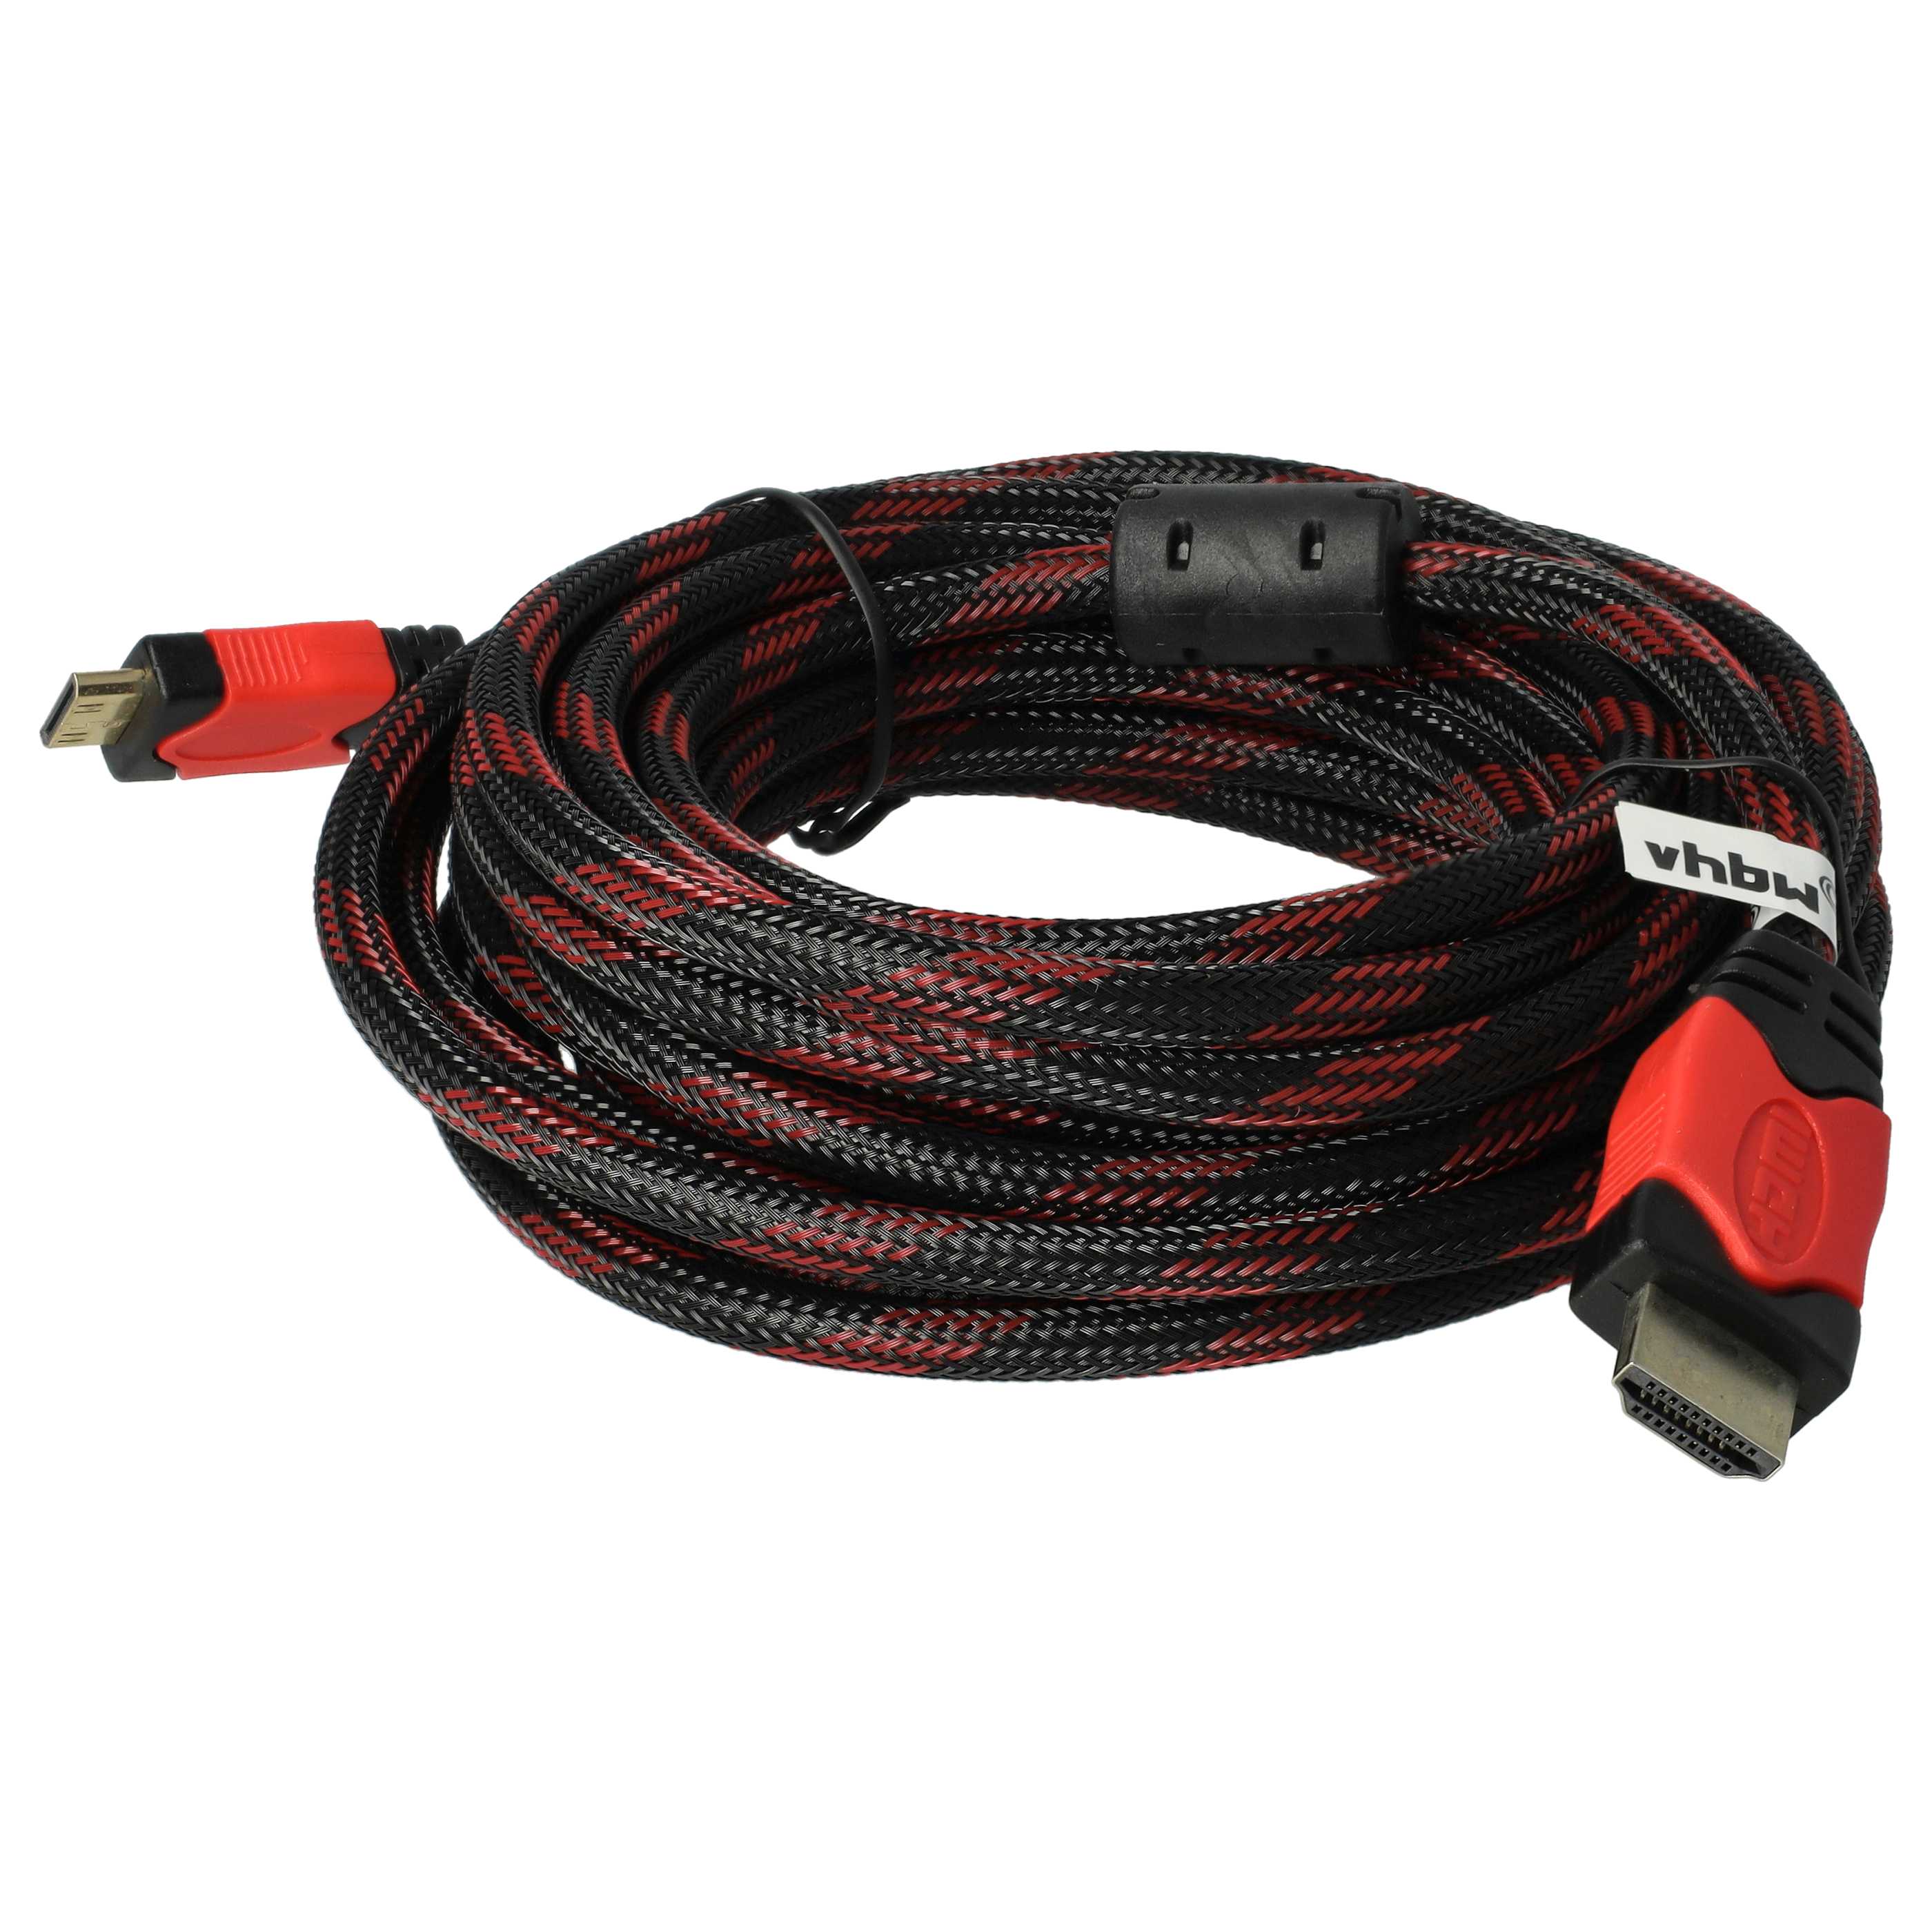 HDMI Cable braided 5mfor Tablet, TV, Television, Playstation, Computer, Monitor, DVD Player etc.